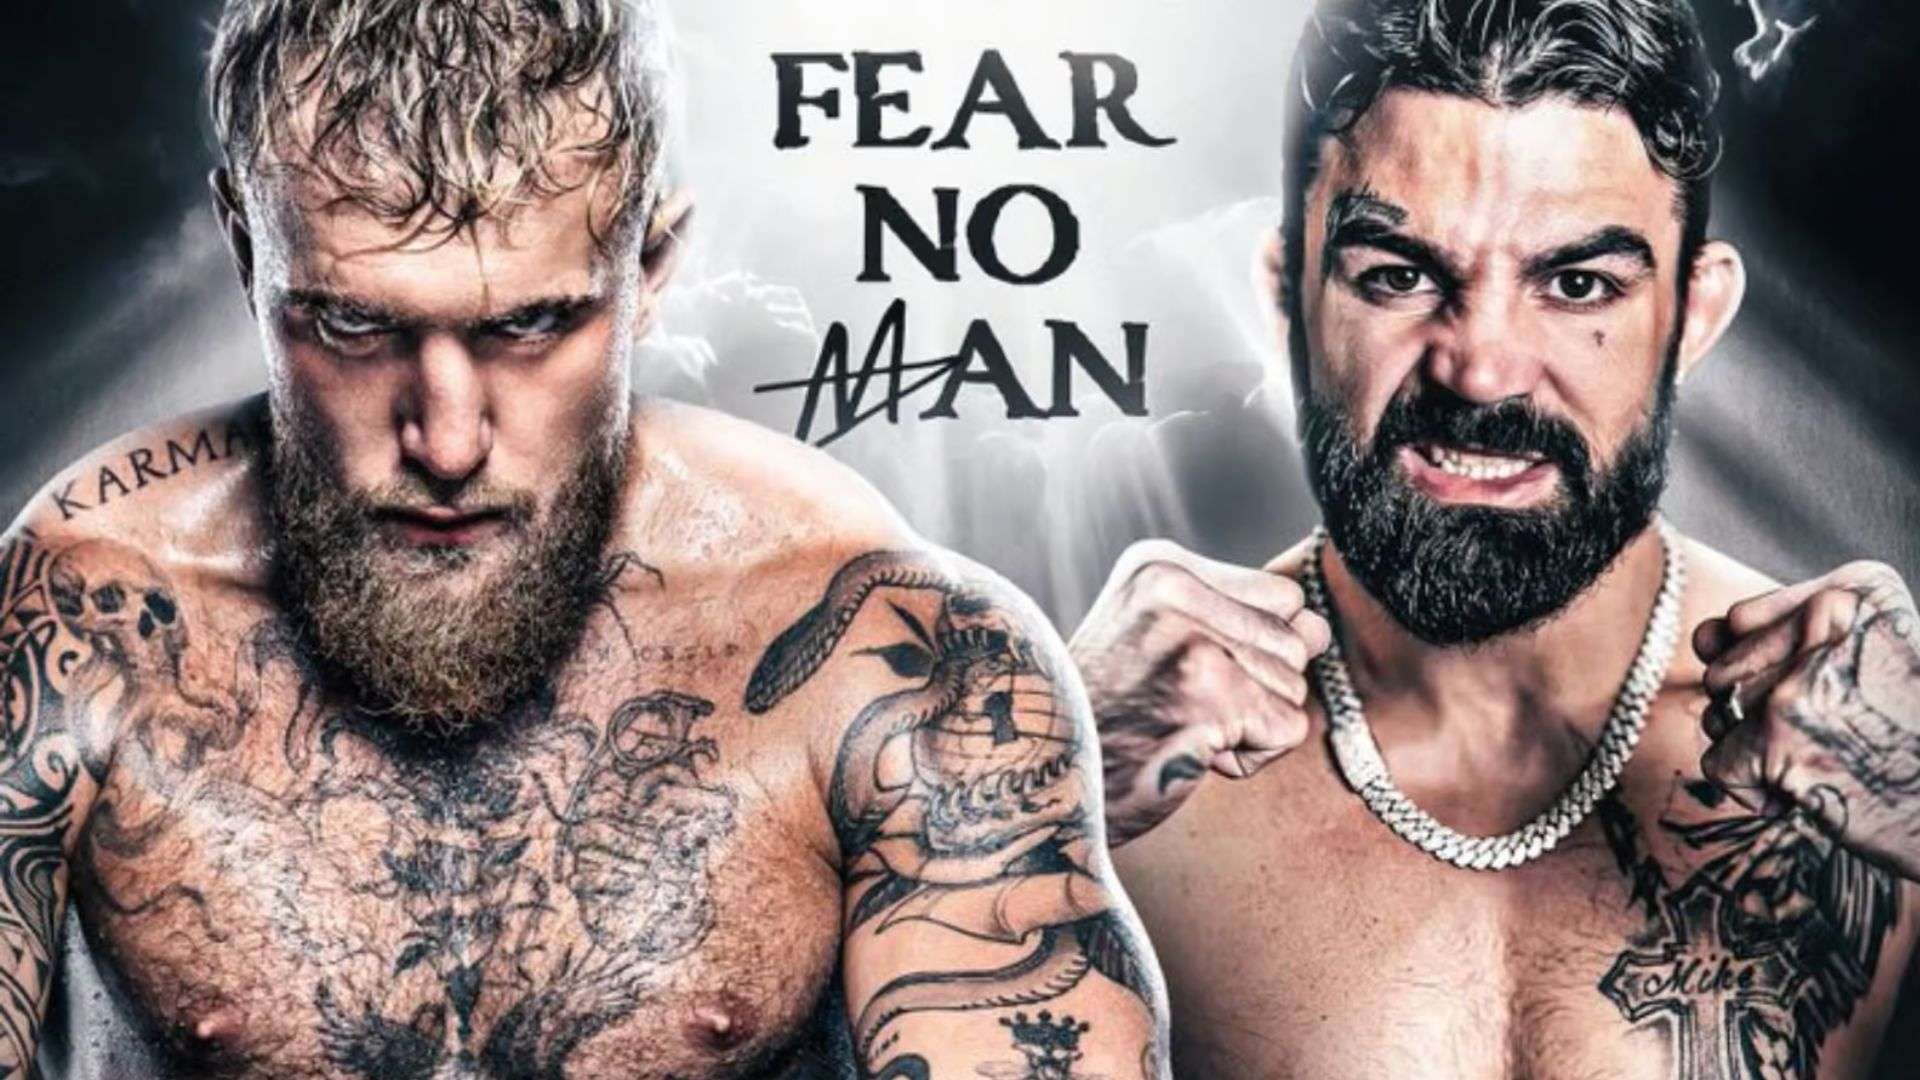 Jake Paul and Mike Perry on Fear No Man poster for boxing fight